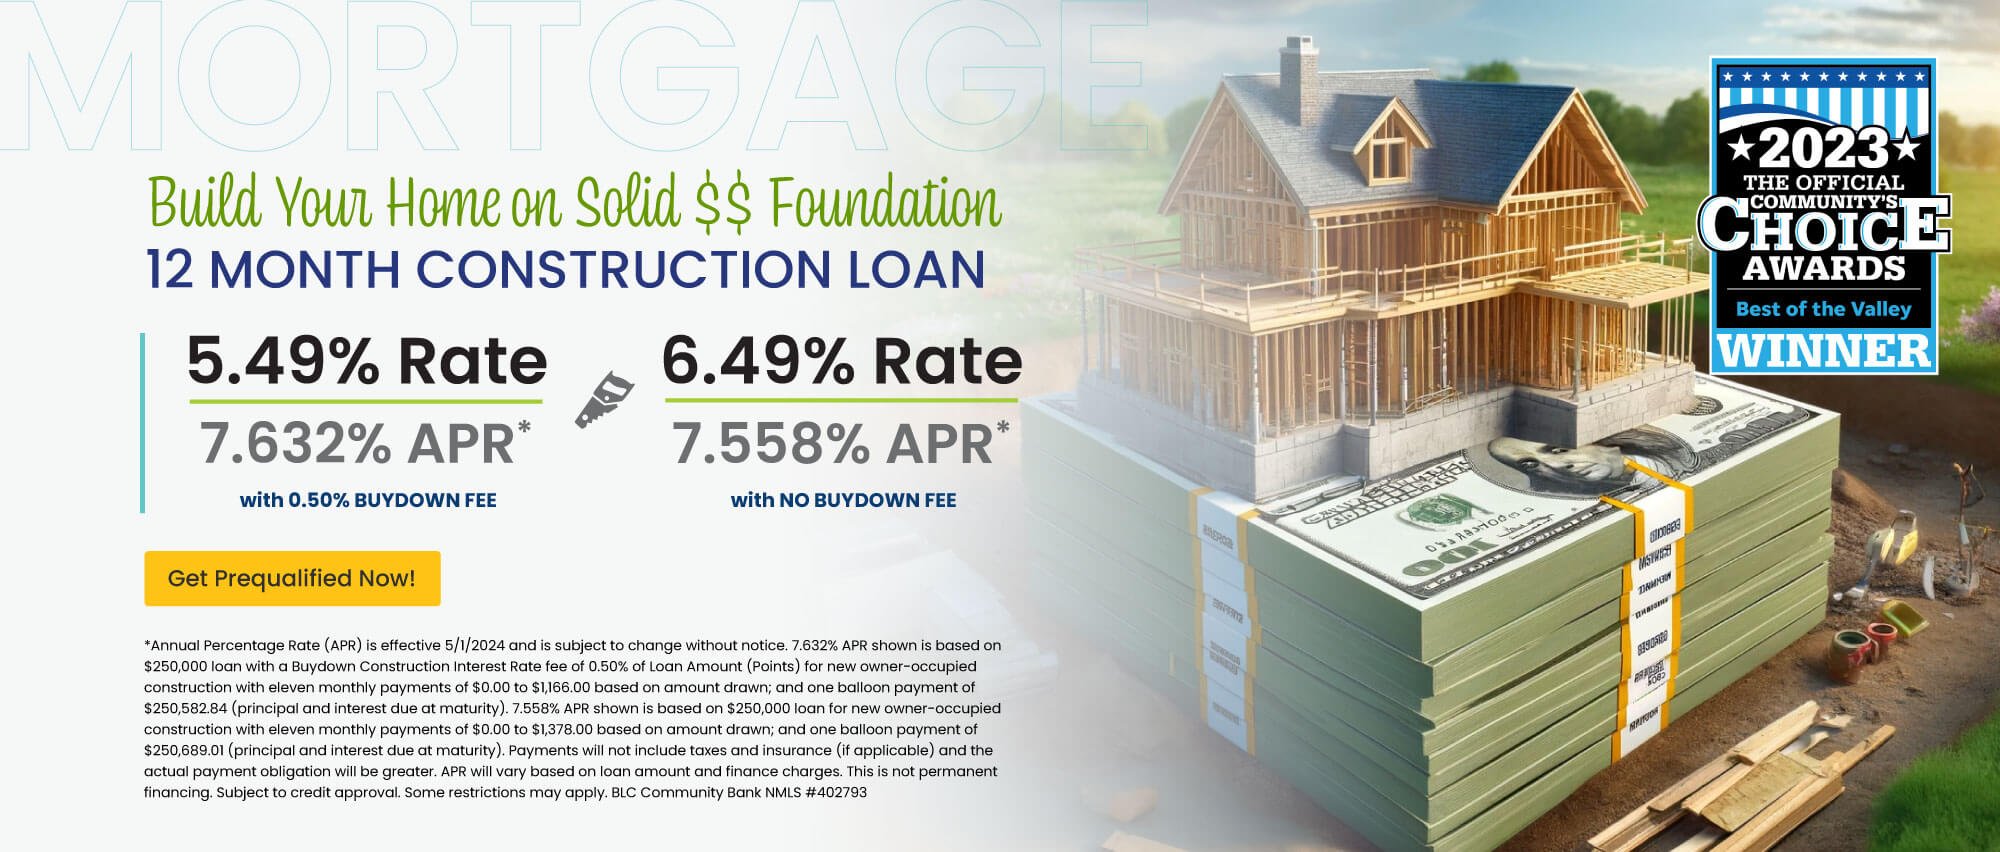 Build Your Home on a Solid $$ Foundation. 5.49% Rate | 7.632% APR with 0.50% Buydown Fee. 6.49% Rate | 7.558% APR with No Buydown Fee. Every home starts with a good foundation. Turn your plans into your dream home! Get prequalified now!